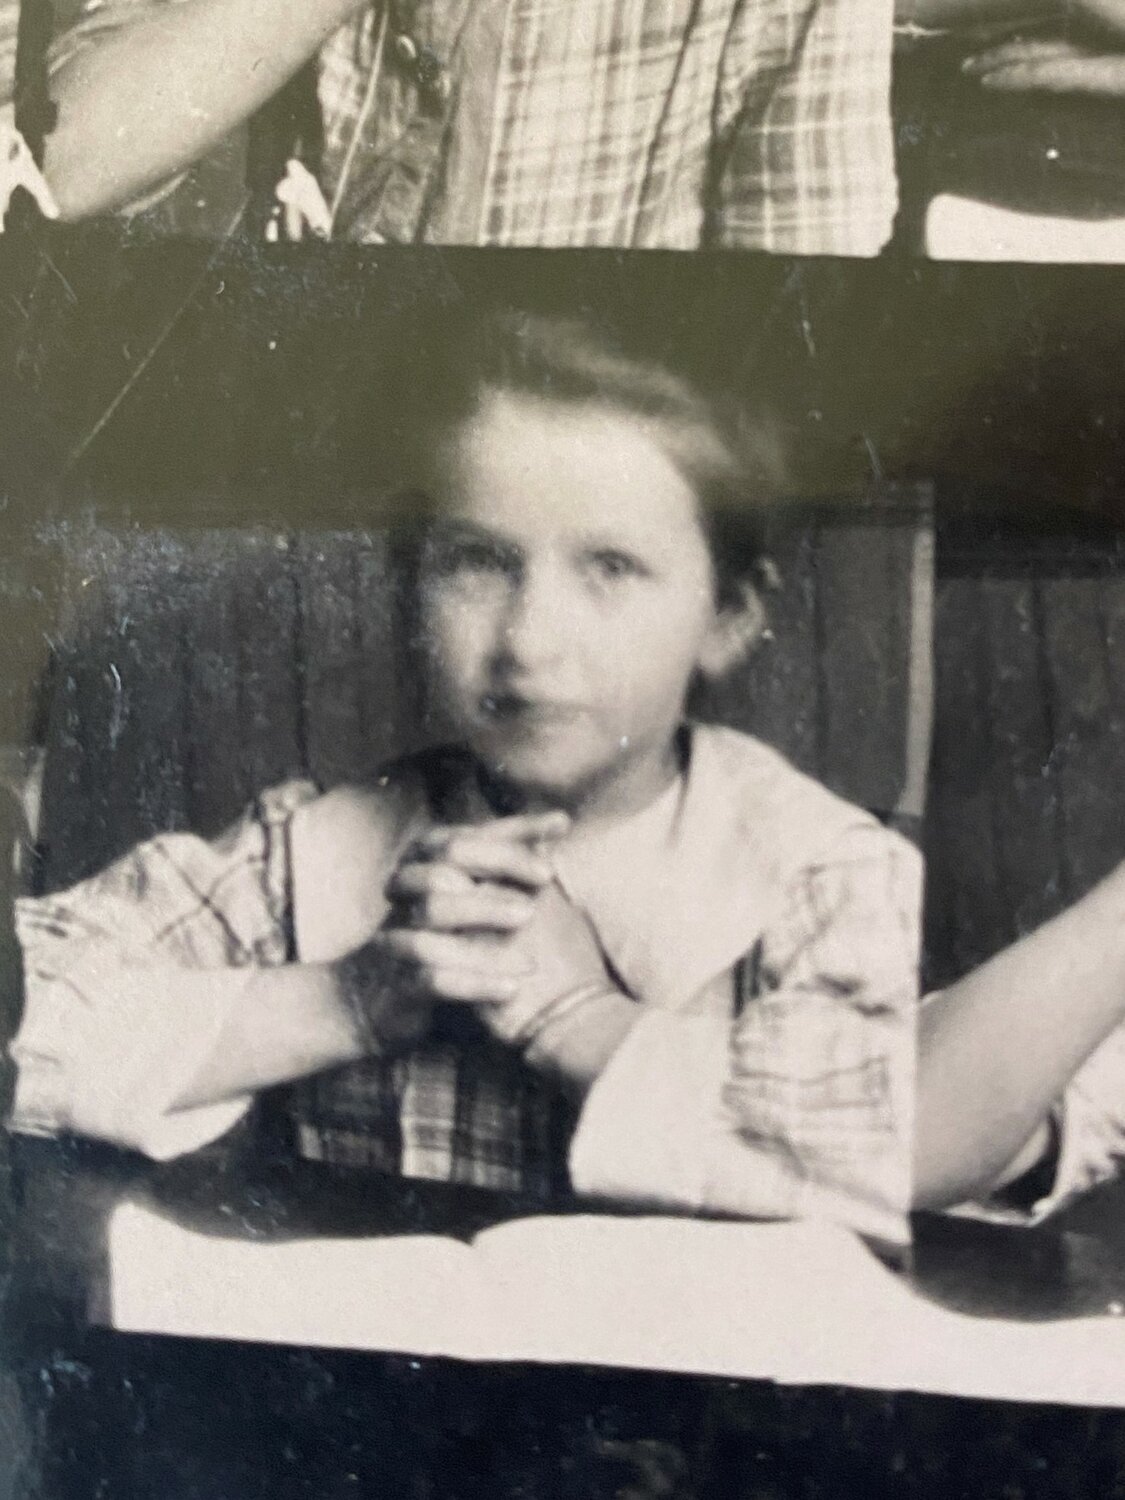 Visitor's Aunt at Wheeler School in the early 1920s.